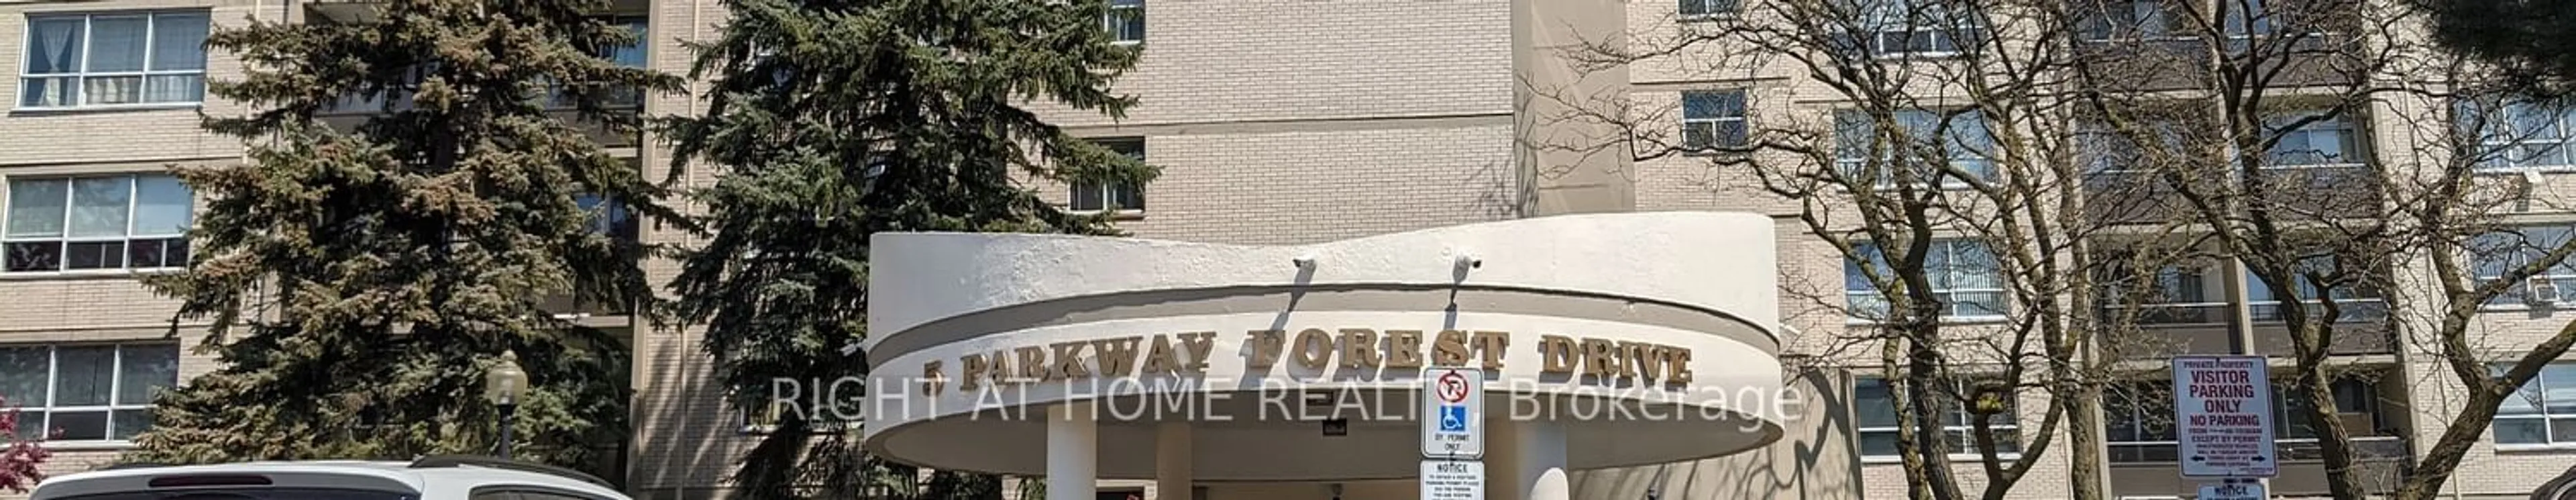 Street view for 5 Parkway Forest Dr #801, Toronto Ontario M2J 1L2